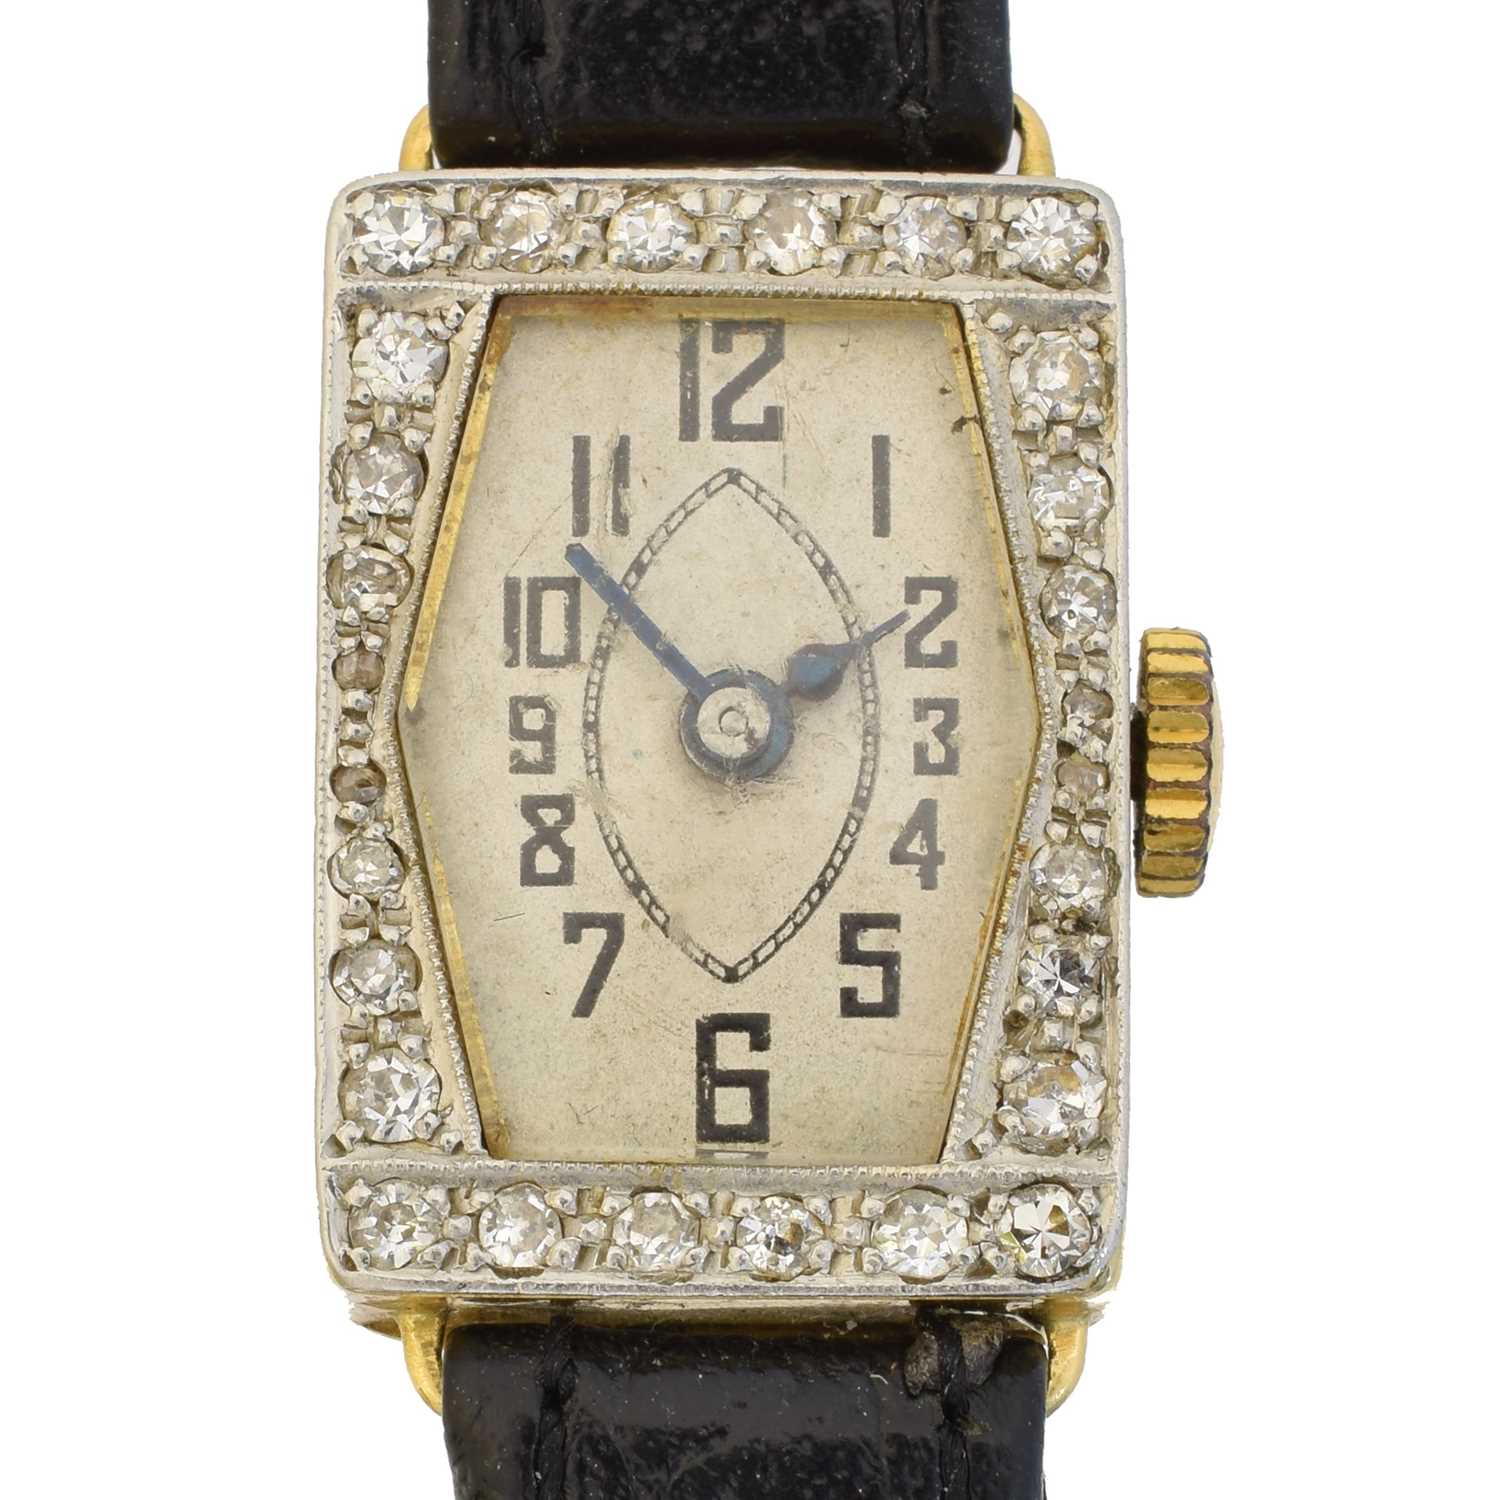 Lot An early 20th century diamond-set cocktail watch by Rotary